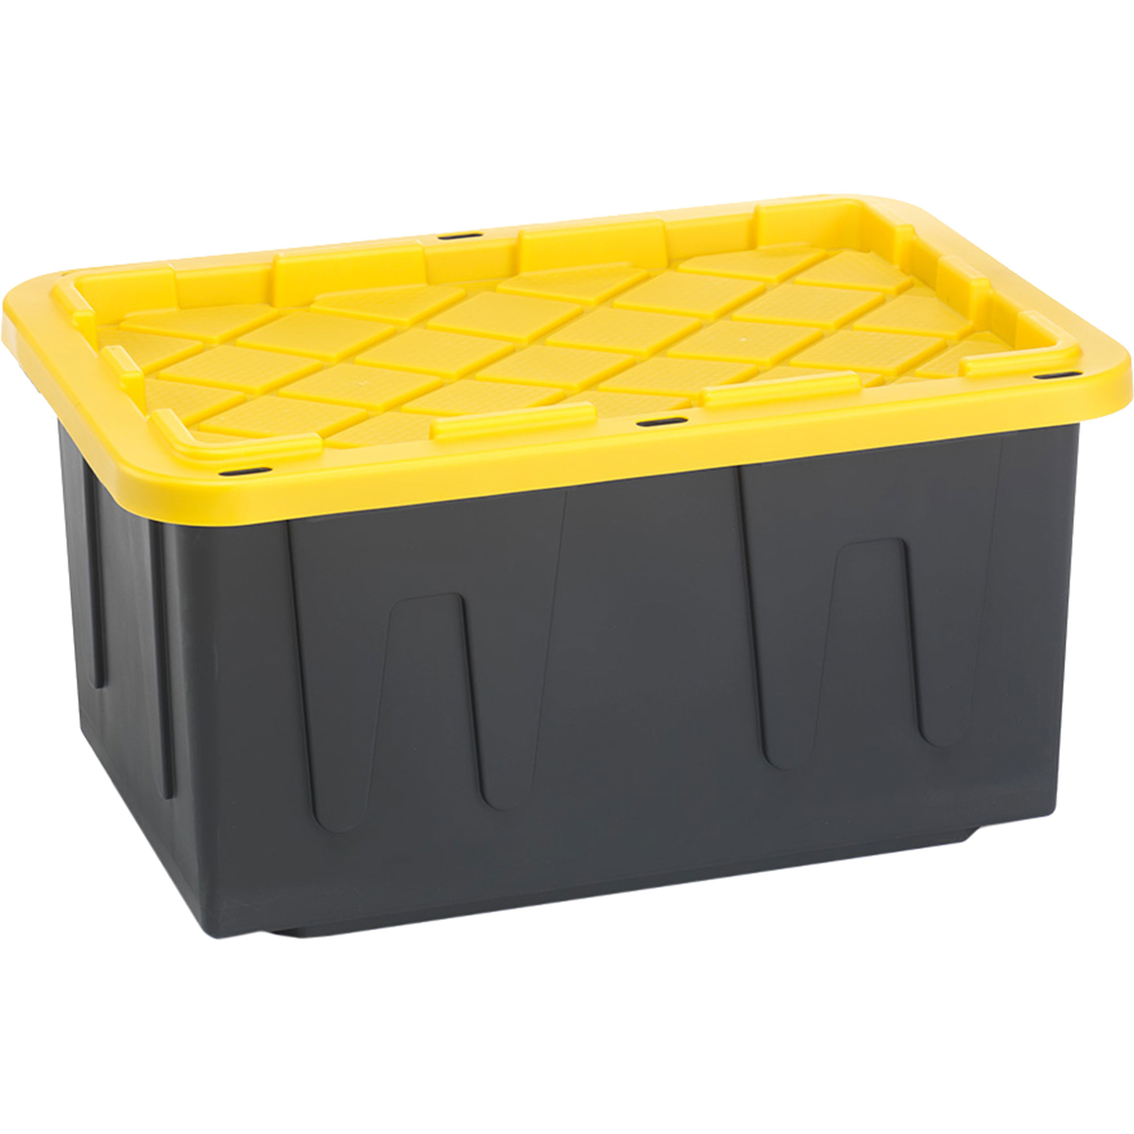 TOUGH BOX 27 Gal Stackable Storage Totes w/ Lids, Black and Yellow (4 pack)  